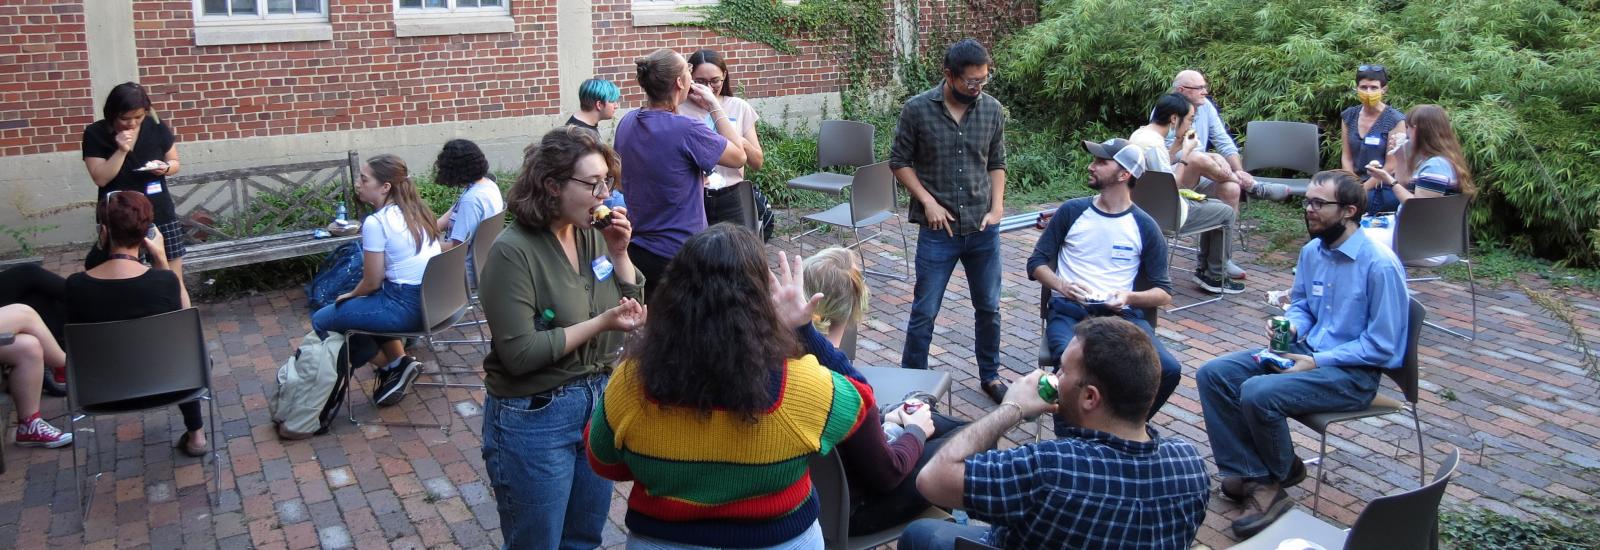 Department members in the Oxley courtyard at a welcome event